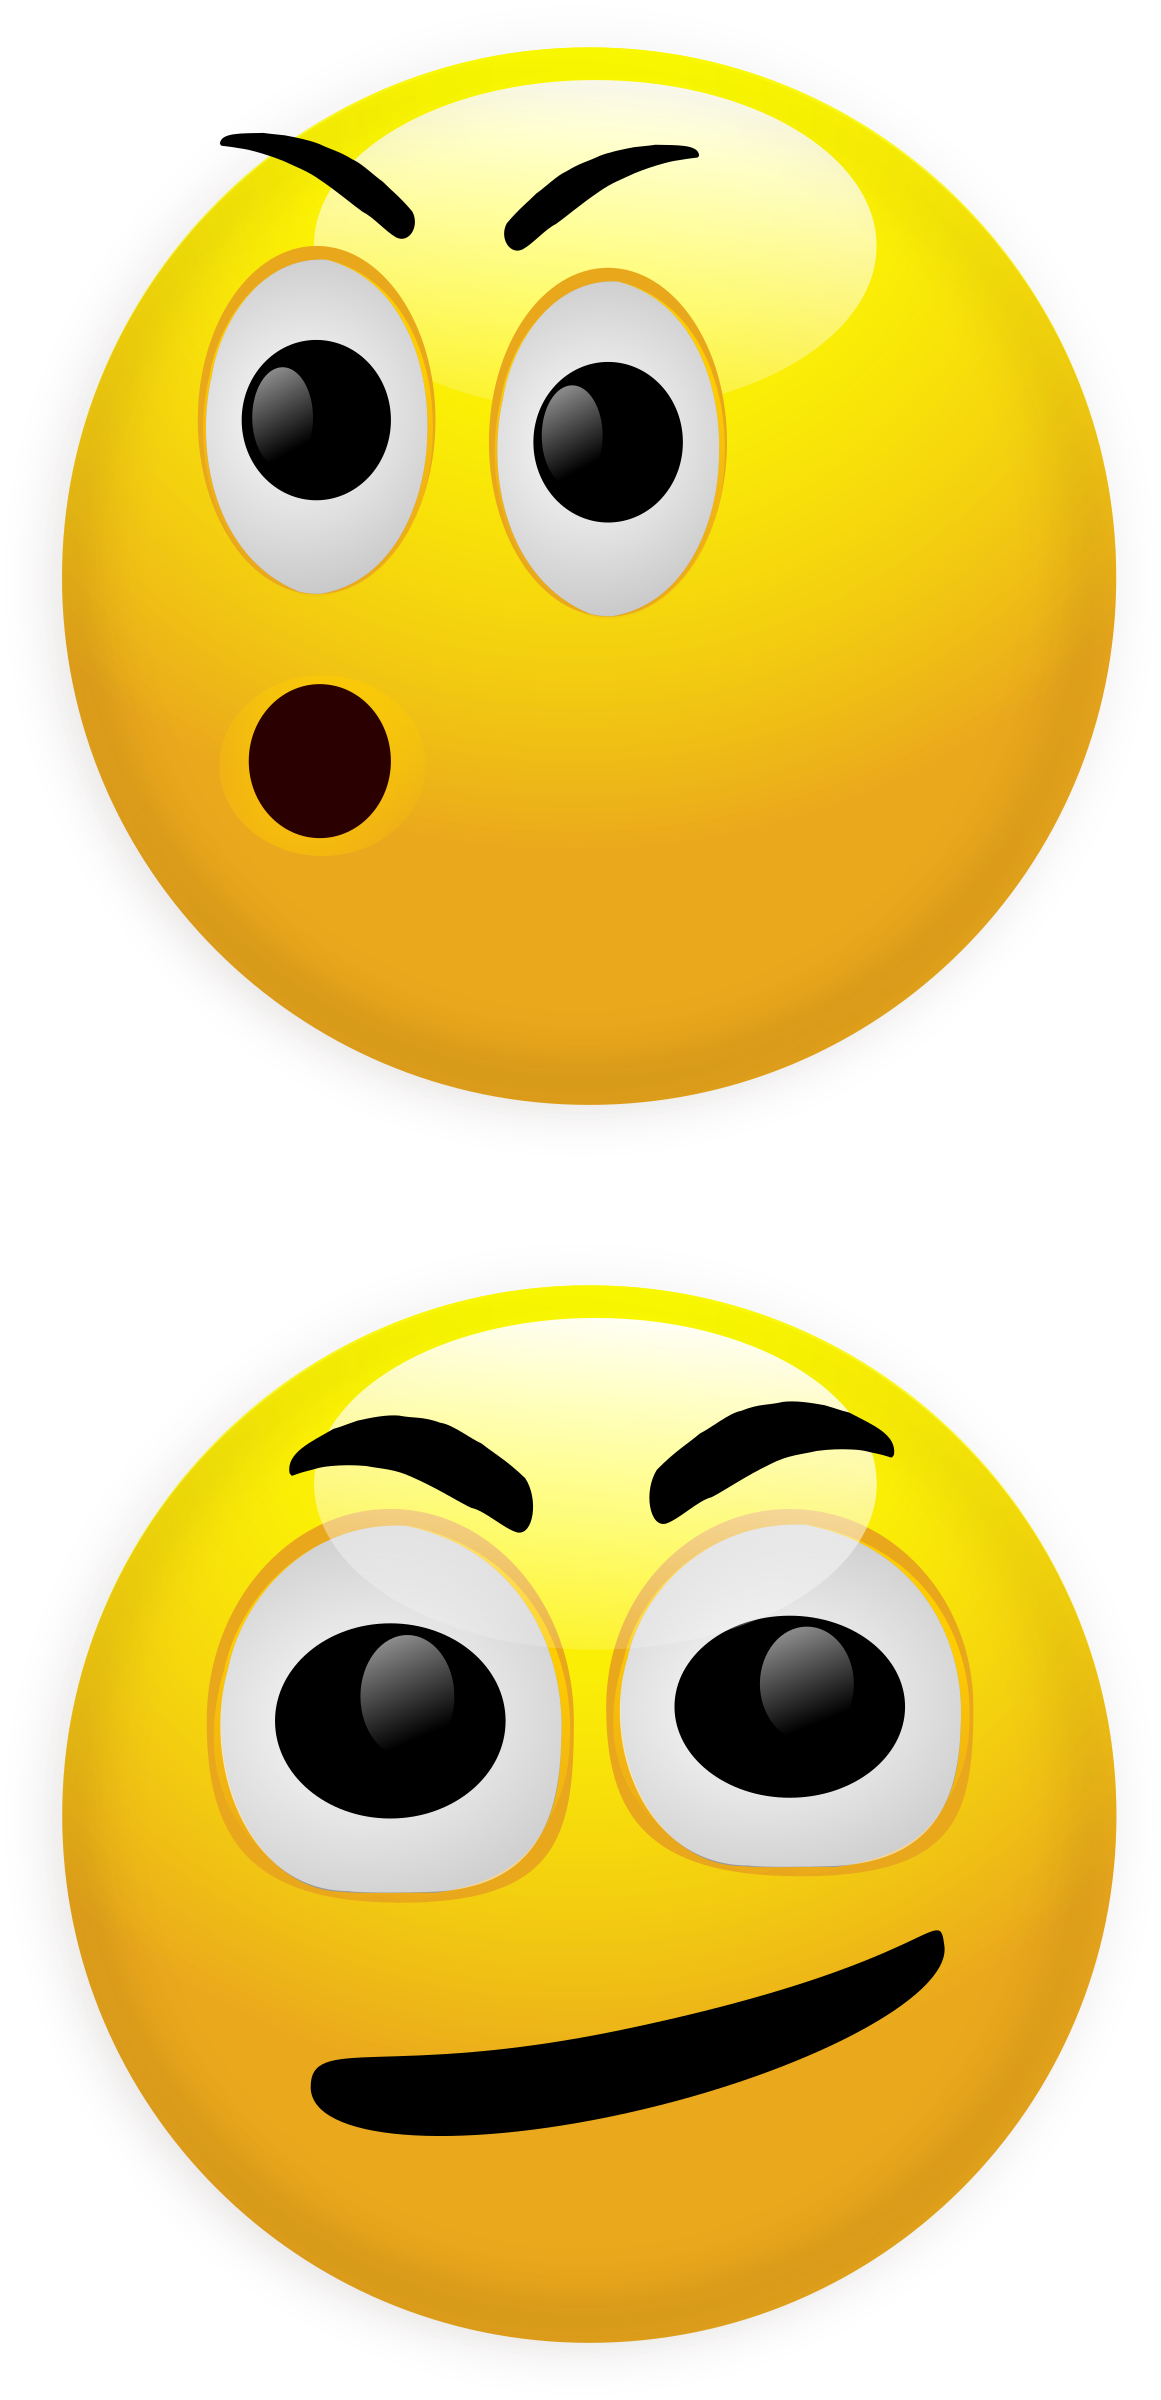 ms office clipart smiley - photo #50